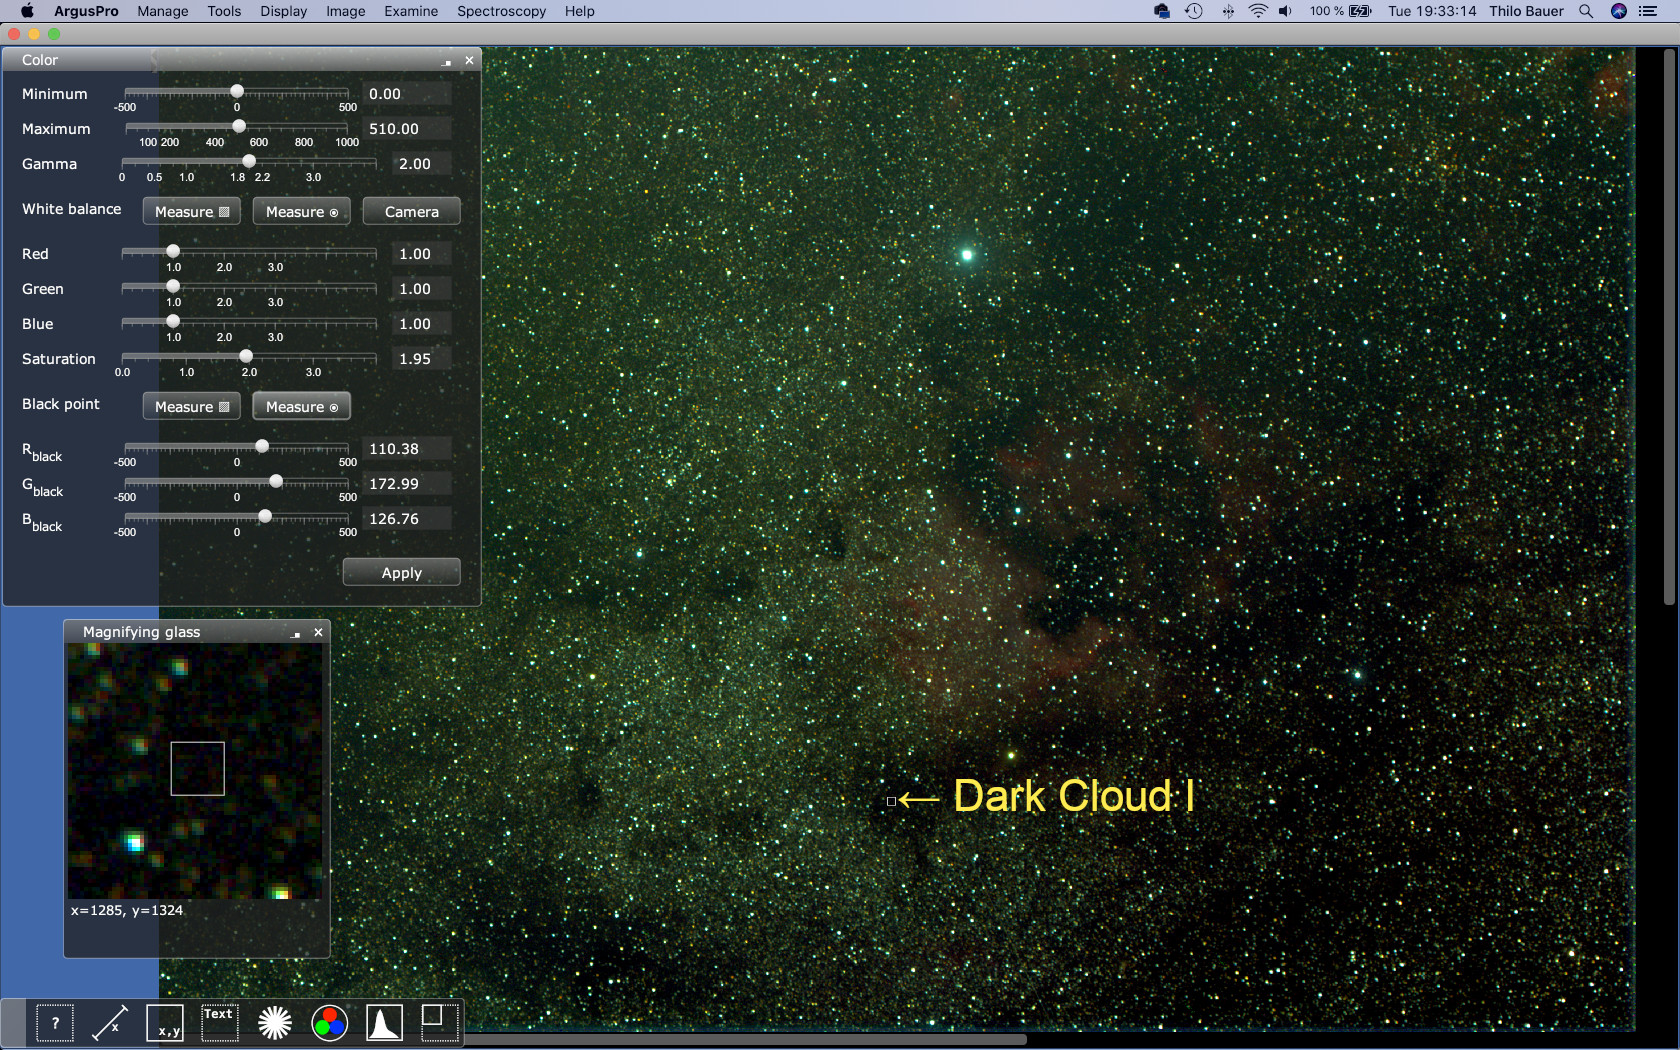 Figure 1: Result from using the dark cloud I close to NGC 7000 as a black point estimated looks promising, but resulted in a loss of the very faint structures in the field of view. This cloud contains many faint stars. Even if the stars aren't really visible (because the sky background is not properly determined) they add reasonable bias. Ths black point estimate is too high resulting in loss of nebula contents and faint stars.